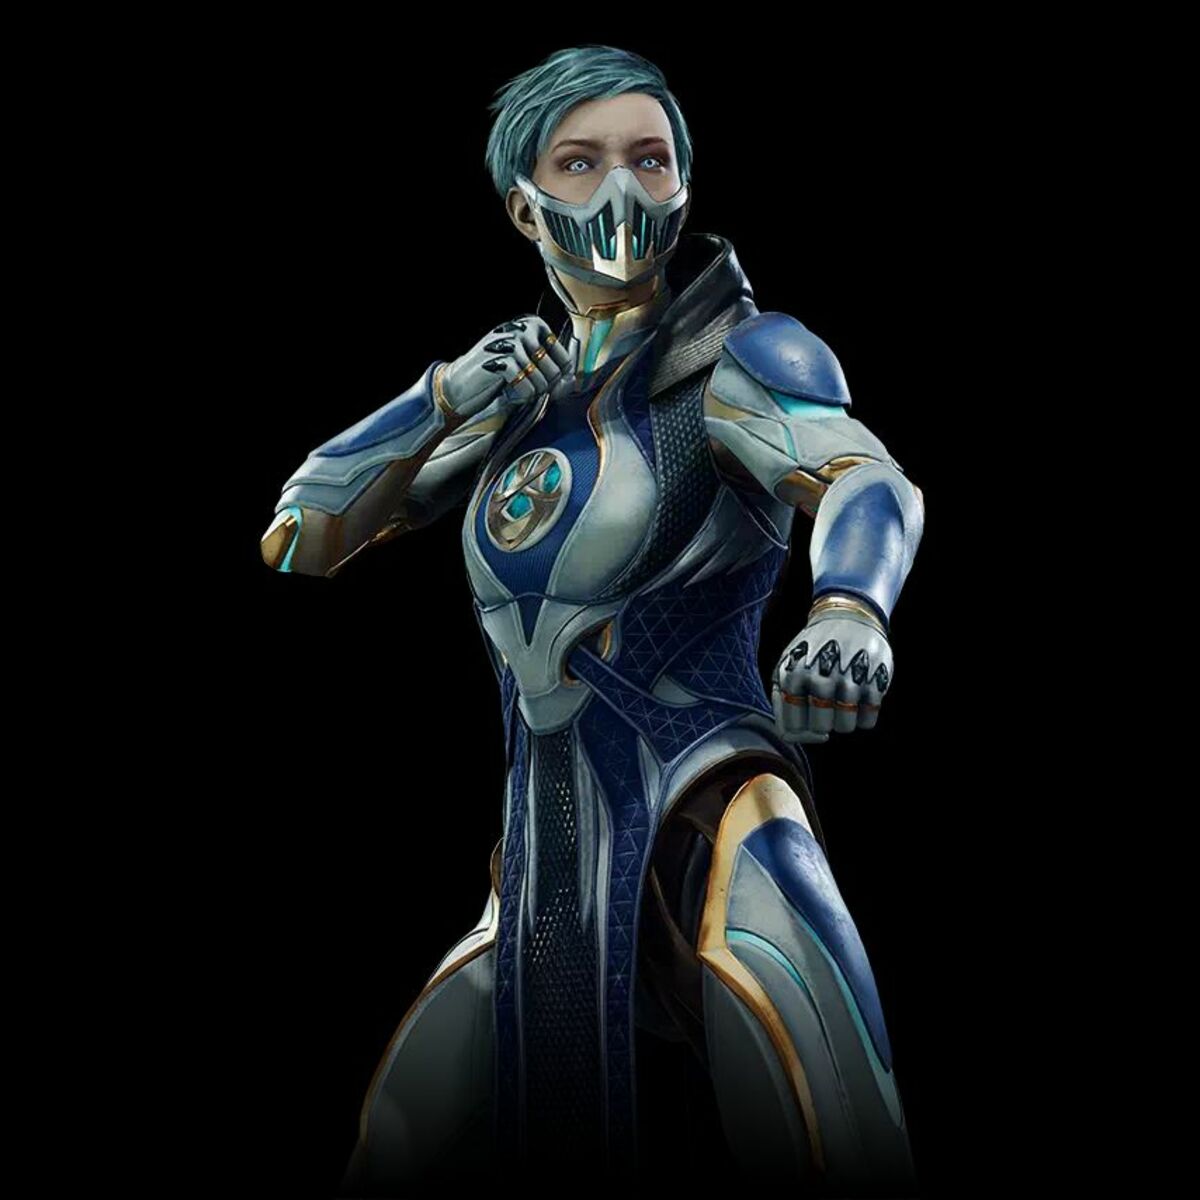 Mortal Kombat 11 release roster expands with chilly cyborg Frost